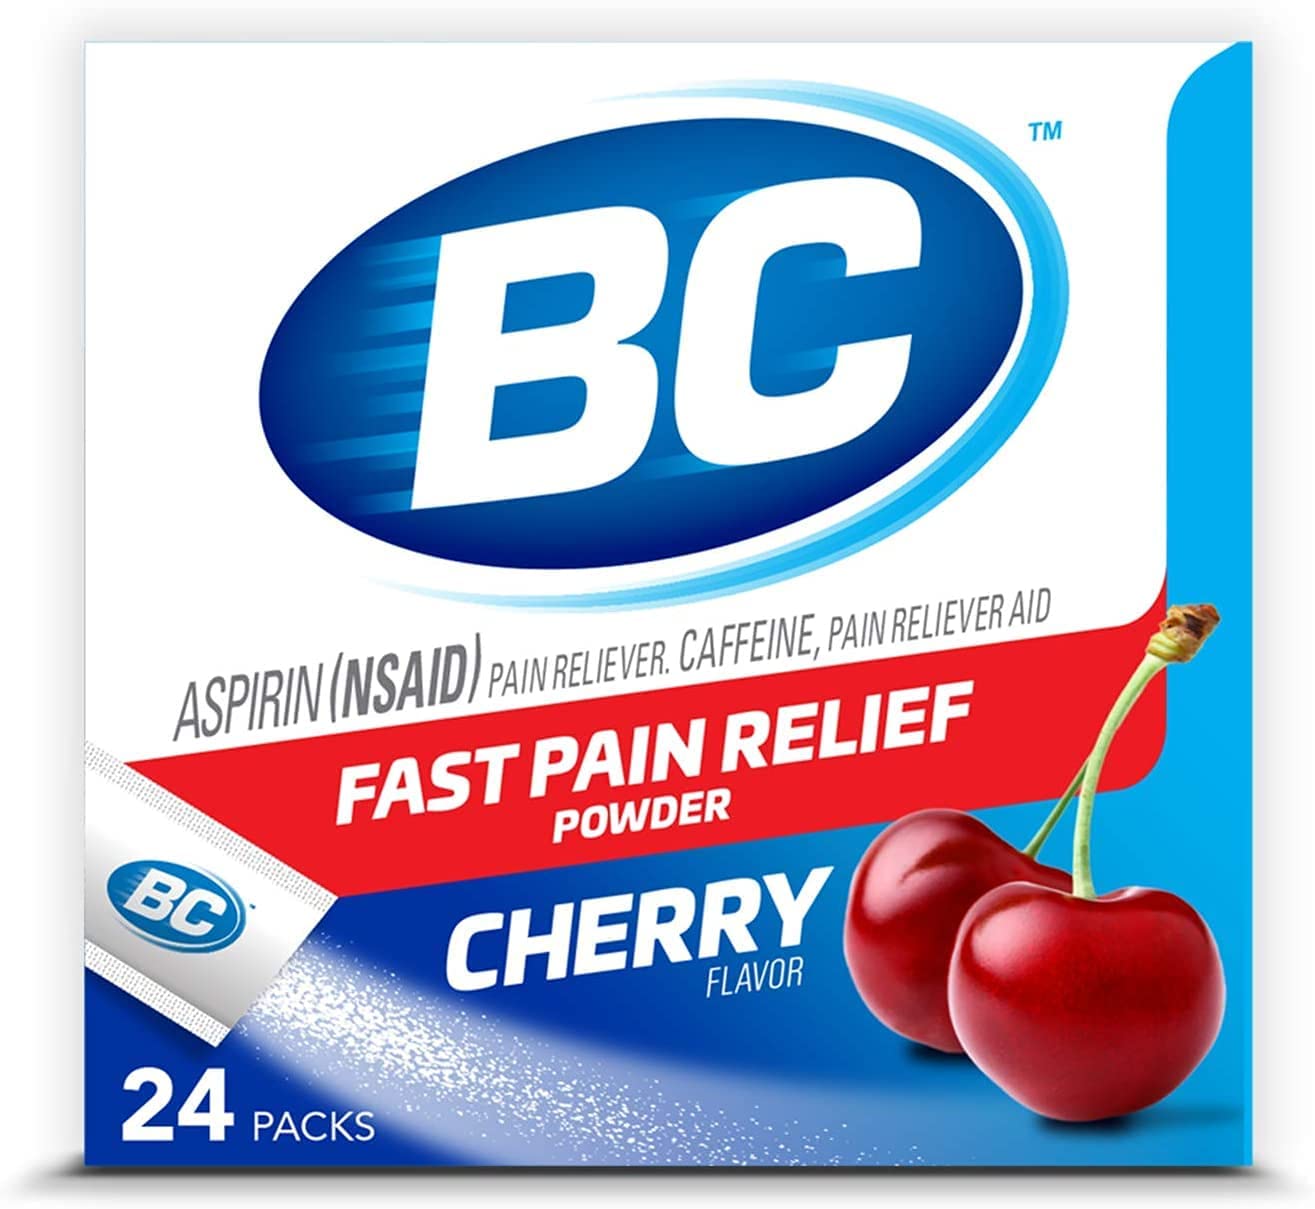 Book Cover BC Powder Pain Reliever, Cherry Flavor Aspirin Dissolve Packs, 24 Count Powder Packets 24 Count (Pack of 1) Cherry